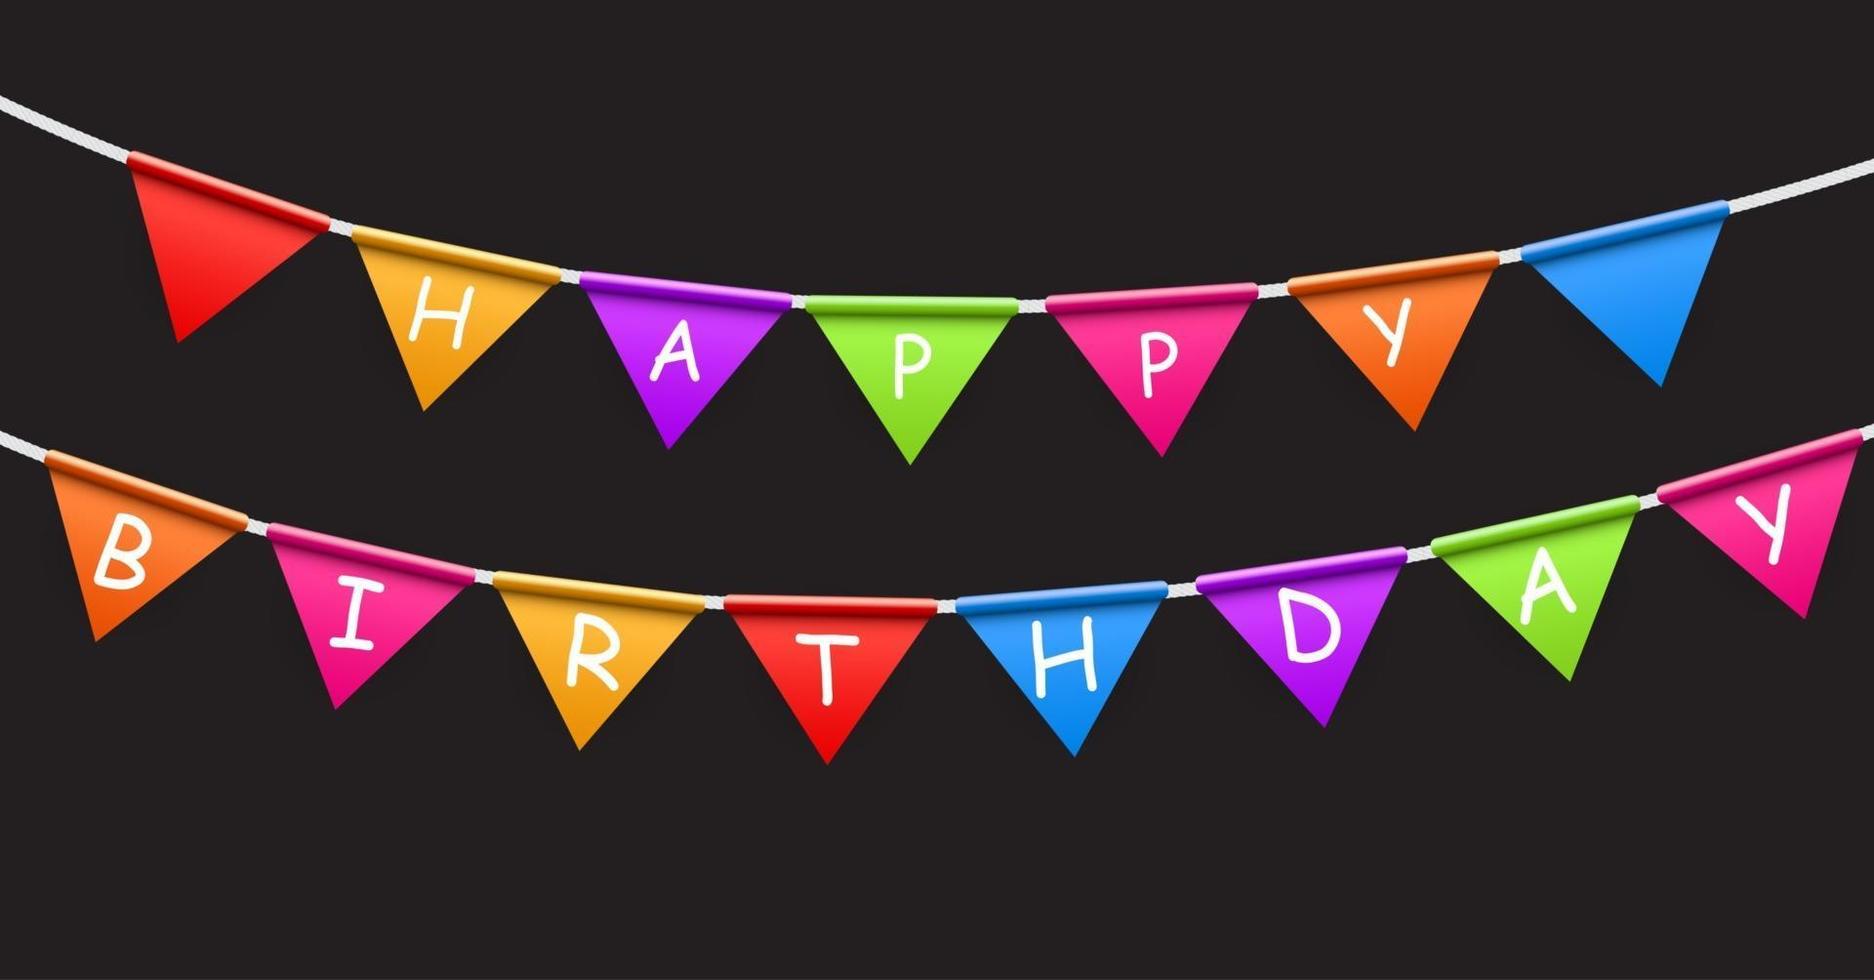 Happy Birthday Party Background with Flags Vector Illustration